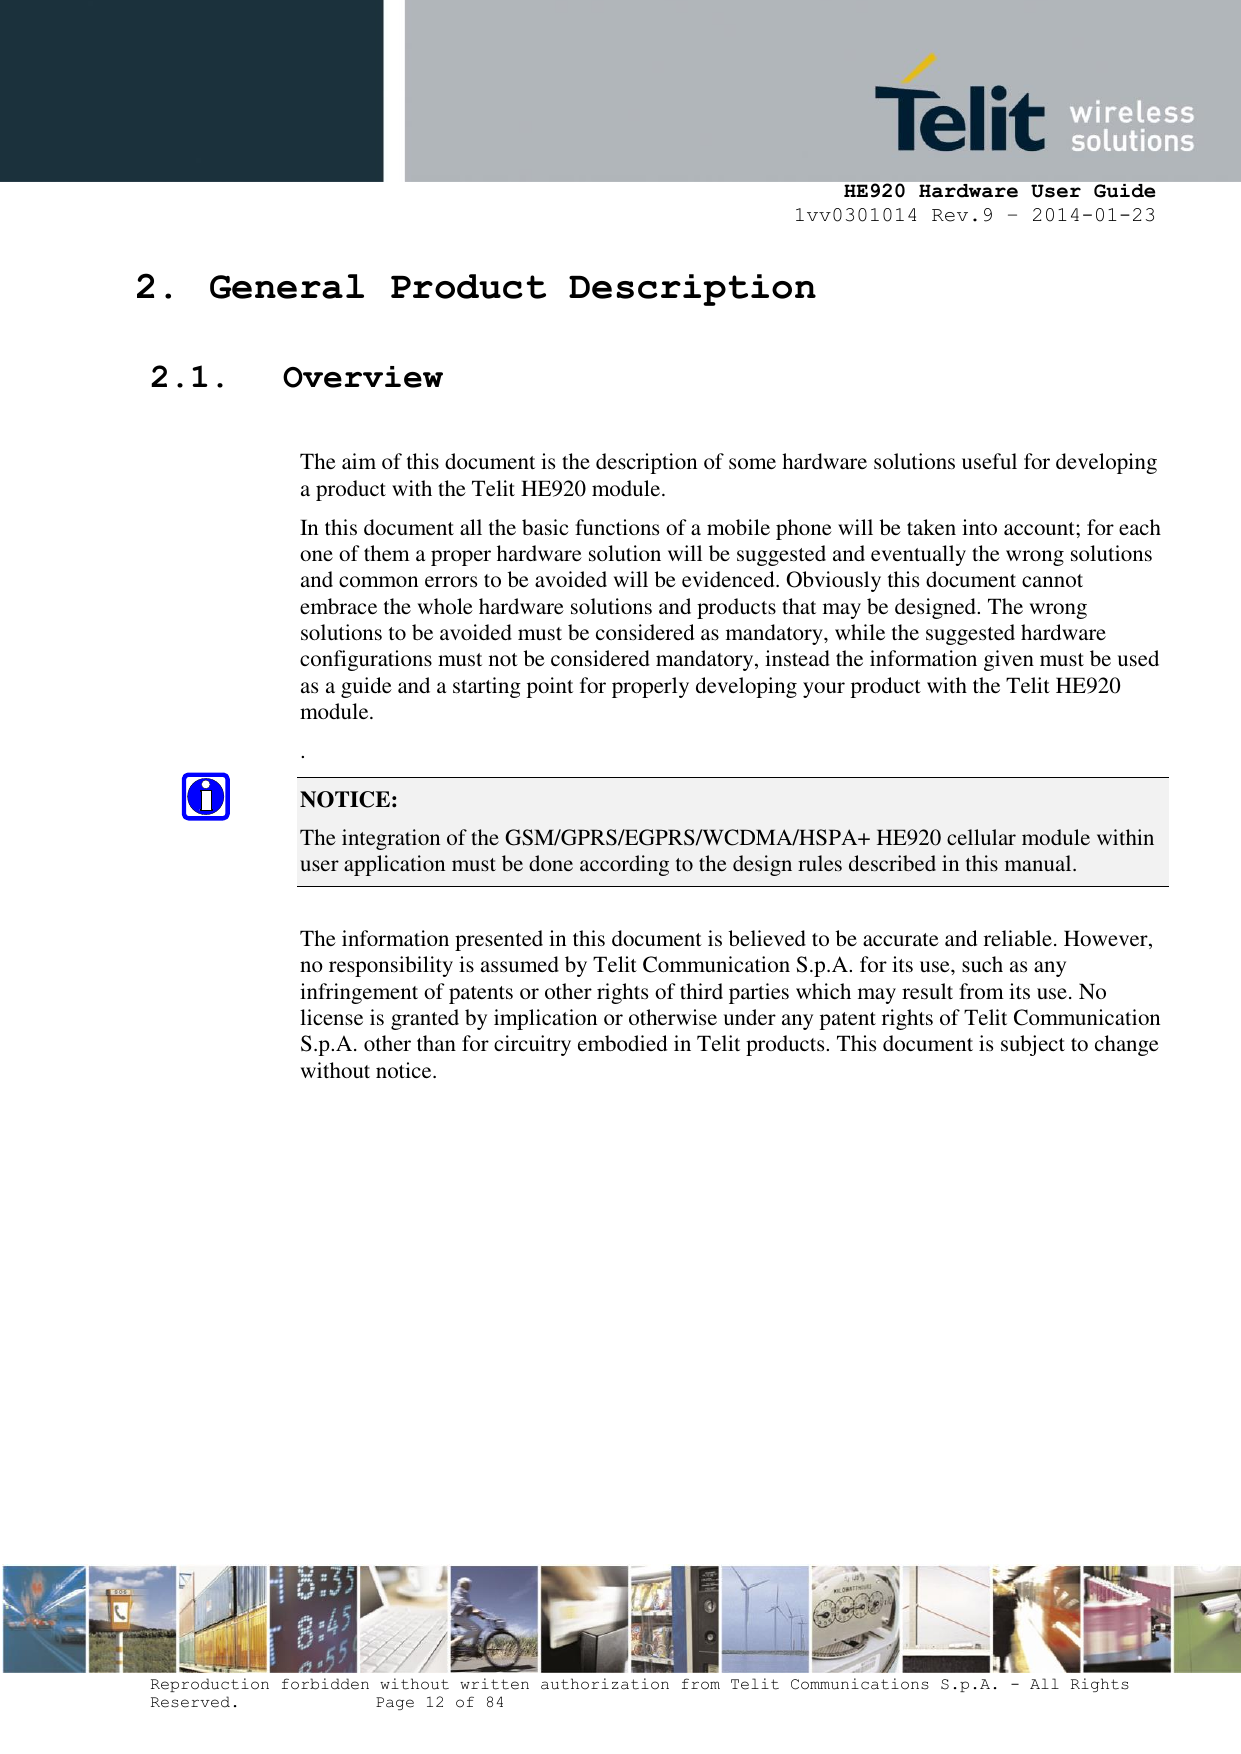     HE920 Hardware User Guide 1vv0301014 Rev.9 – 2014-01-23 Reproduction forbidden without written authorization from Telit Communications S.p.A. - All Rights Reserved.    Page 12 of 84  2. General Product Description 2.1. Overview  The aim of this document is the description of some hardware solutions useful for developing a product with the Telit HE920 module. In this document all the basic functions of a mobile phone will be taken into account; for each one of them a proper hardware solution will be suggested and eventually the wrong solutions and common errors to be avoided will be evidenced. Obviously this document cannot embrace the whole hardware solutions and products that may be designed. The wrong solutions to be avoided must be considered as mandatory, while the suggested hardware configurations must not be considered mandatory, instead the information given must be used as a guide and a starting point for properly developing your product with the Telit HE920 module. . NOTICE: The integration of the GSM/GPRS/EGPRS/WCDMA/HSPA+ HE920 cellular module within user application must be done according to the design rules described in this manual.     The information presented in this document is believed to be accurate and reliable. However, no responsibility is assumed by Telit Communication S.p.A. for its use, such as any infringement of patents or other rights of third parties which may result from its use. No license is granted by implication or otherwise under any patent rights of Telit Communication S.p.A. other than for circuitry embodied in Telit products. This document is subject to change without notice.  